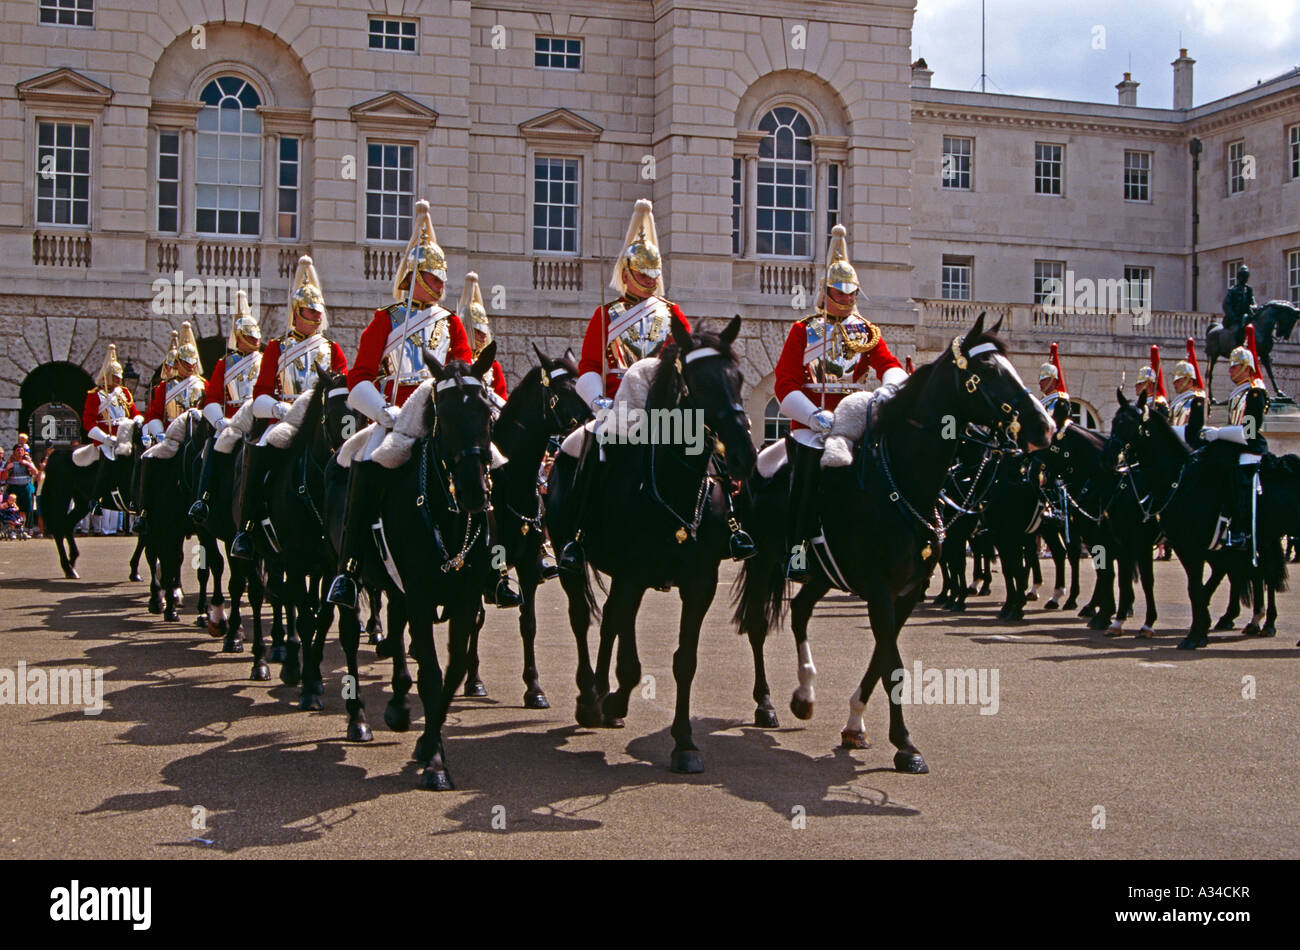 Horse guards on horses, changing of the guard, Horse Guards Parade, Whitehall, London, England Stock Photo